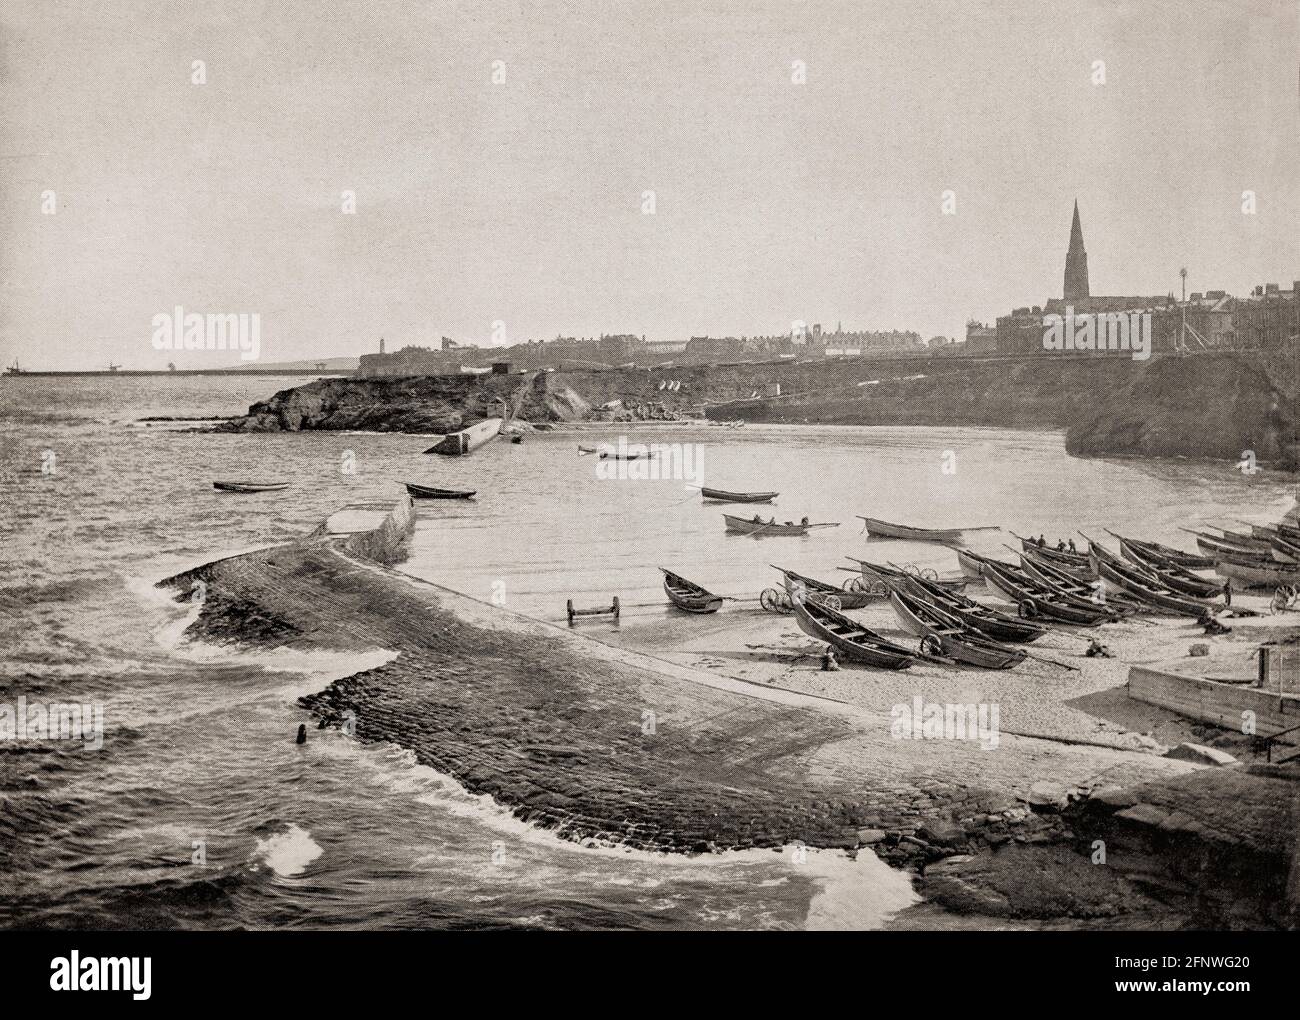 A late 19th Century view of fishing boats aka or cobles drawn up on the beach at Cullercoats, between Tynemouth and Whitley Bay,  Northumberland, England. The harbour is the home of the Dove Marine Laboratory of 1897, a research and teaching laboratory which forms part of the School of Marine Science and Technology within Newcastle University. Stock Photo